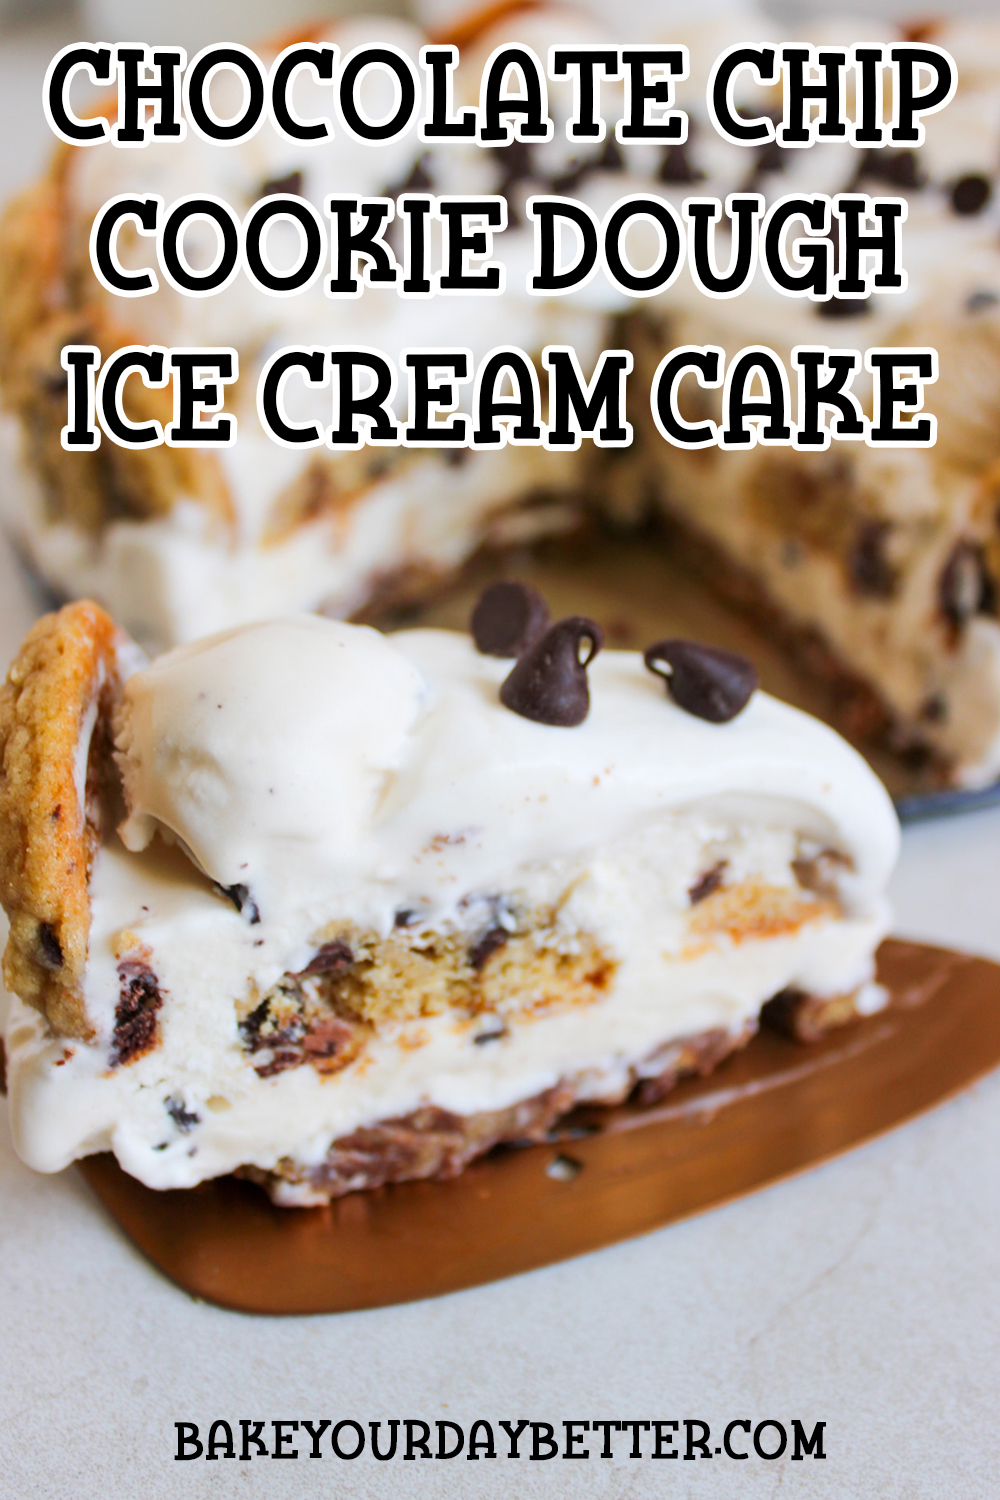 picture of ice cream cake with text overlay that says: chocolate chip cookie dough ice cream cake